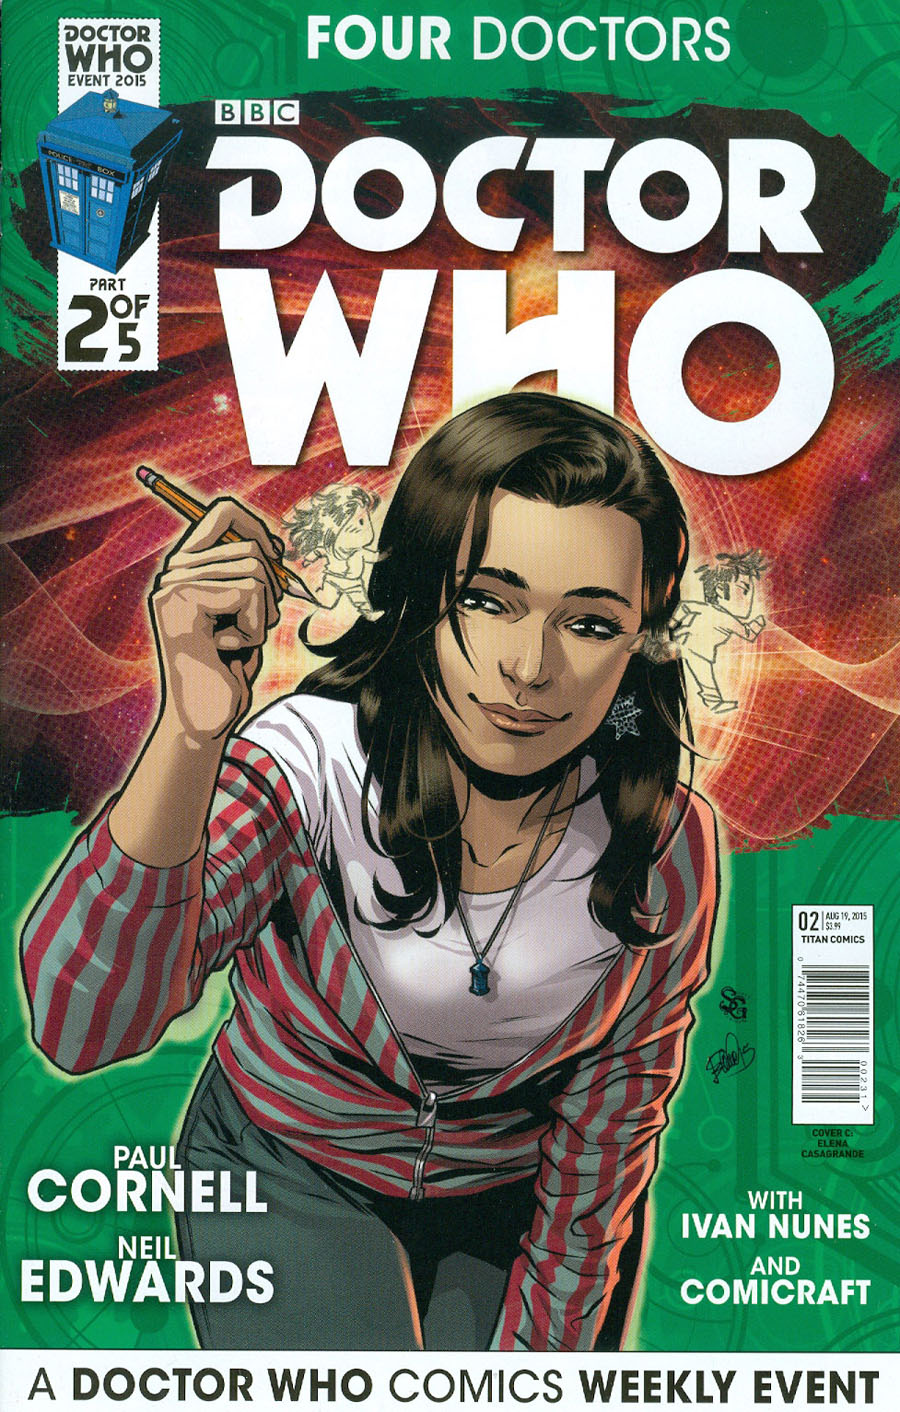 Doctor Who Event 2015 Four Doctors #2 Cover C Incentive Elena Casagrande Interlinking Companion Variant Cover